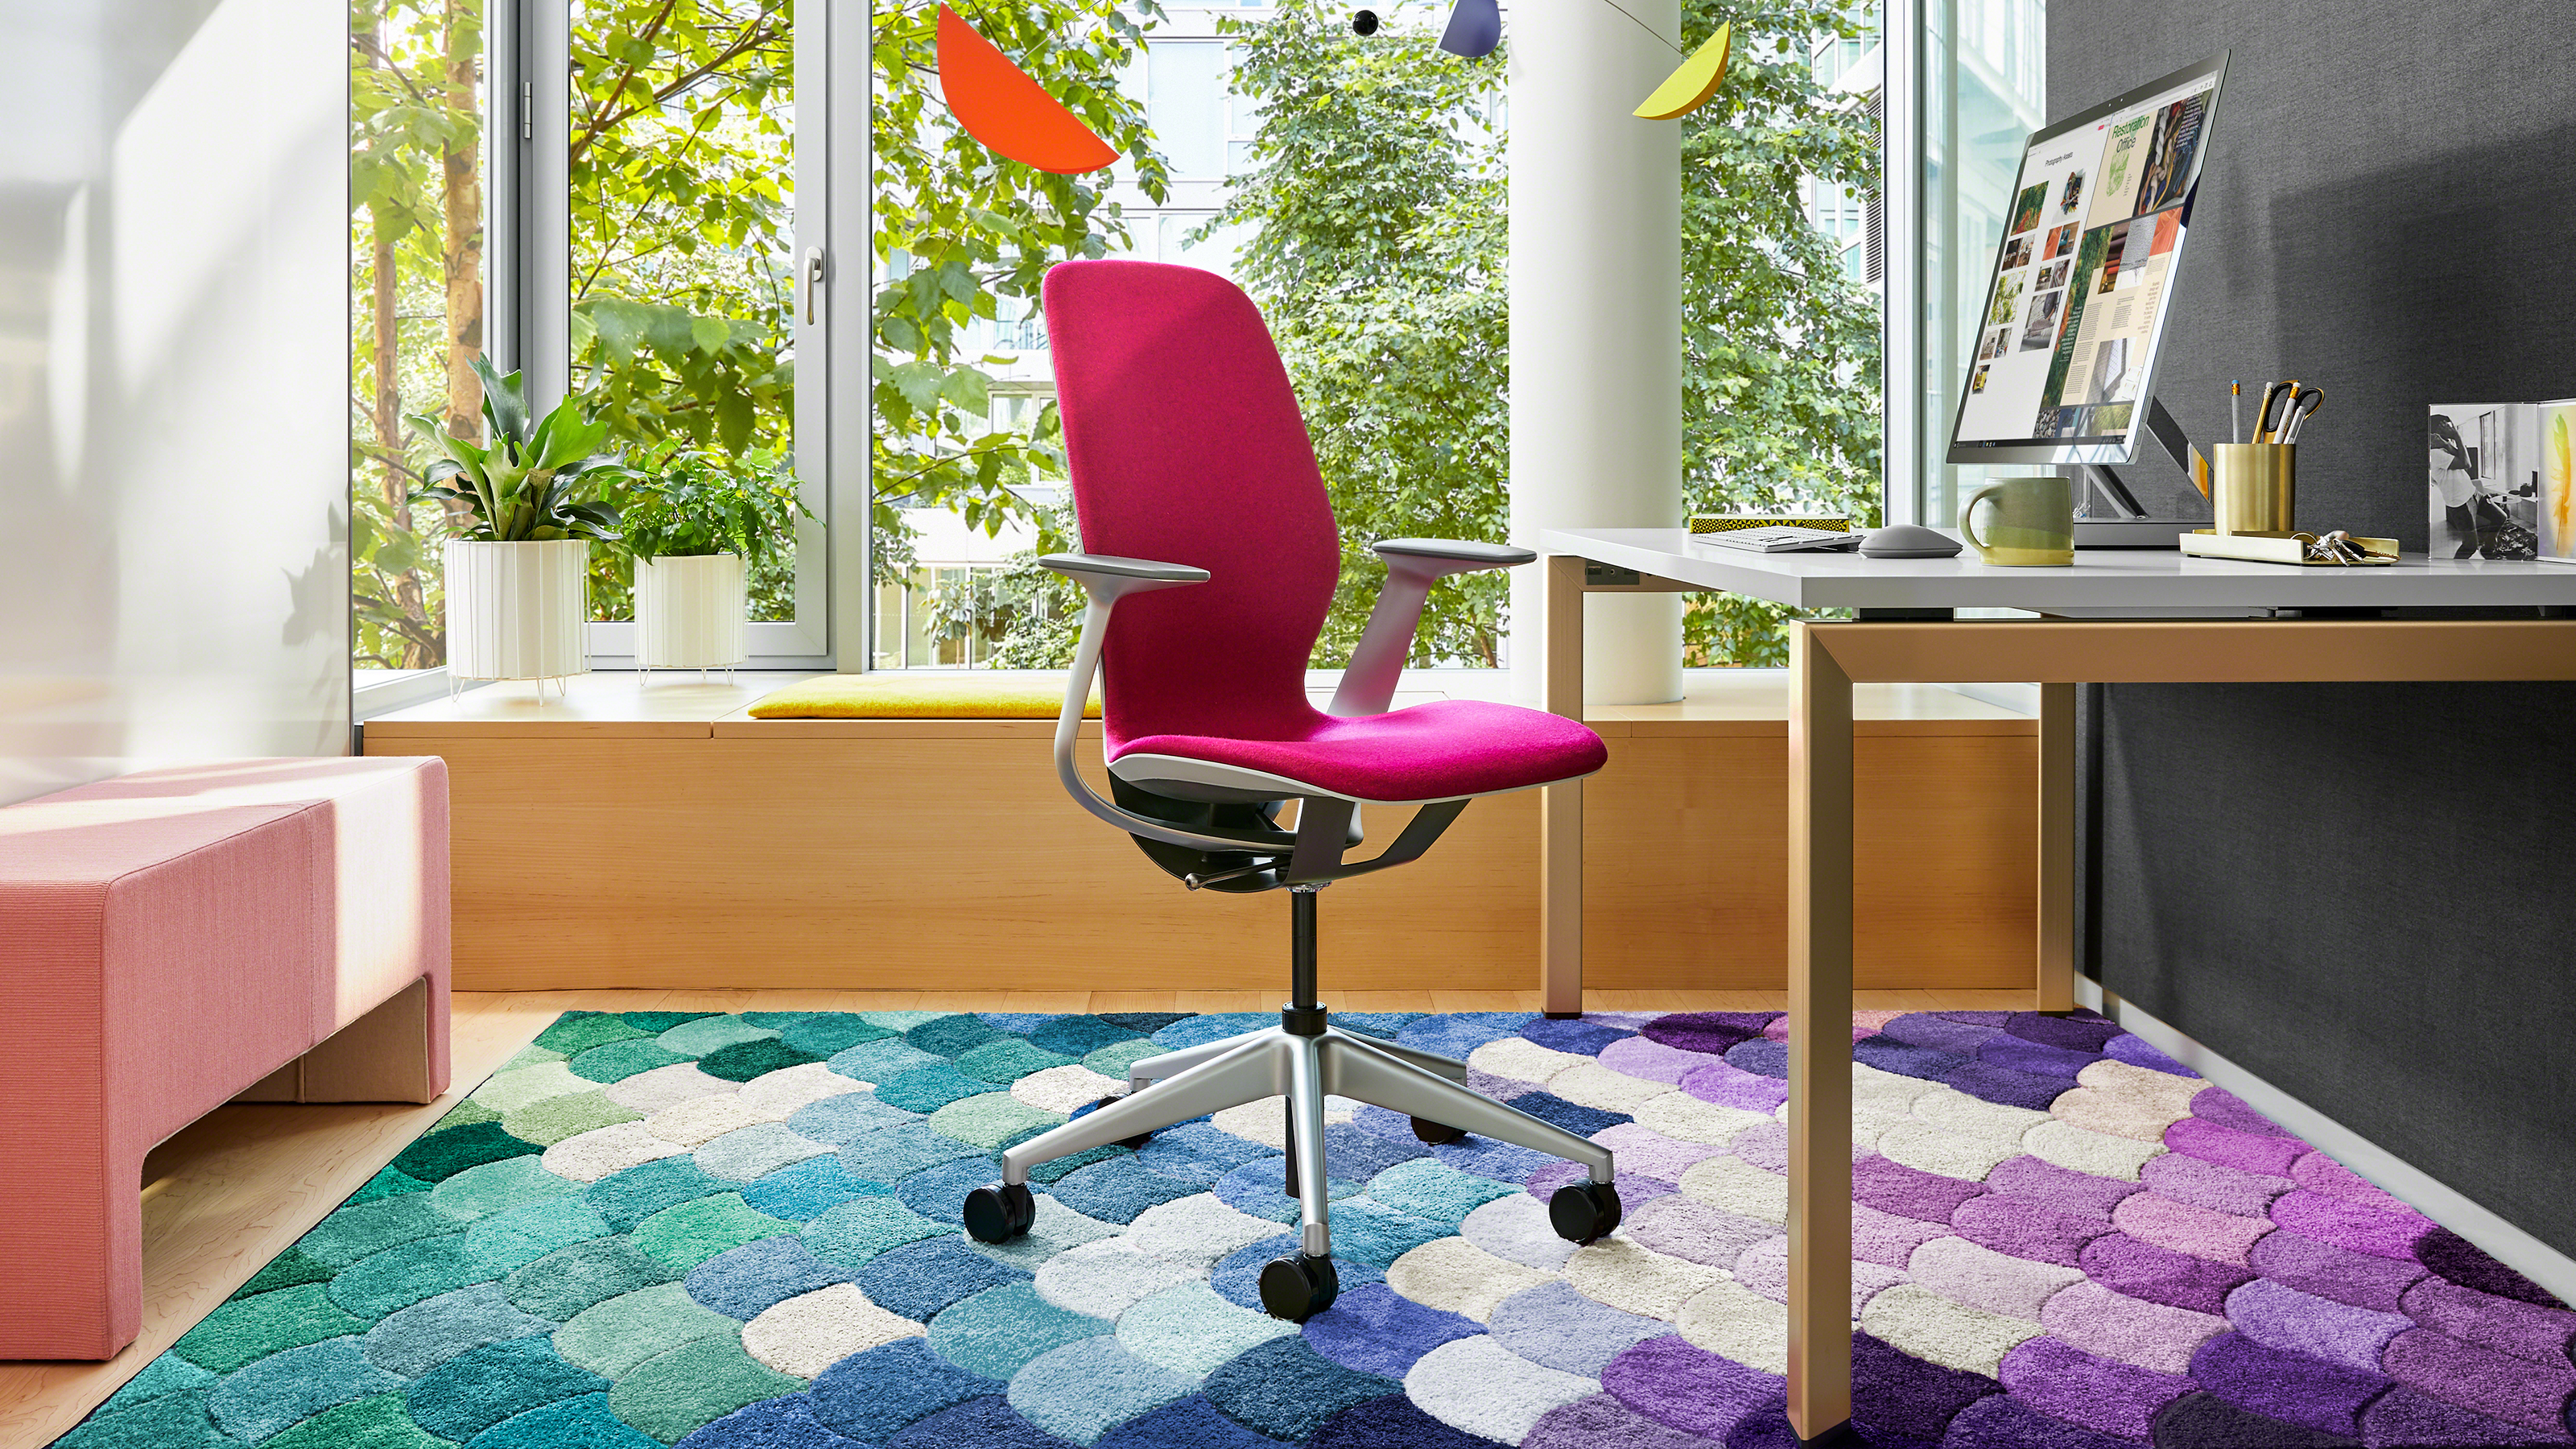 SILQ office chair by Steelcase is a breakthrough in seating design.